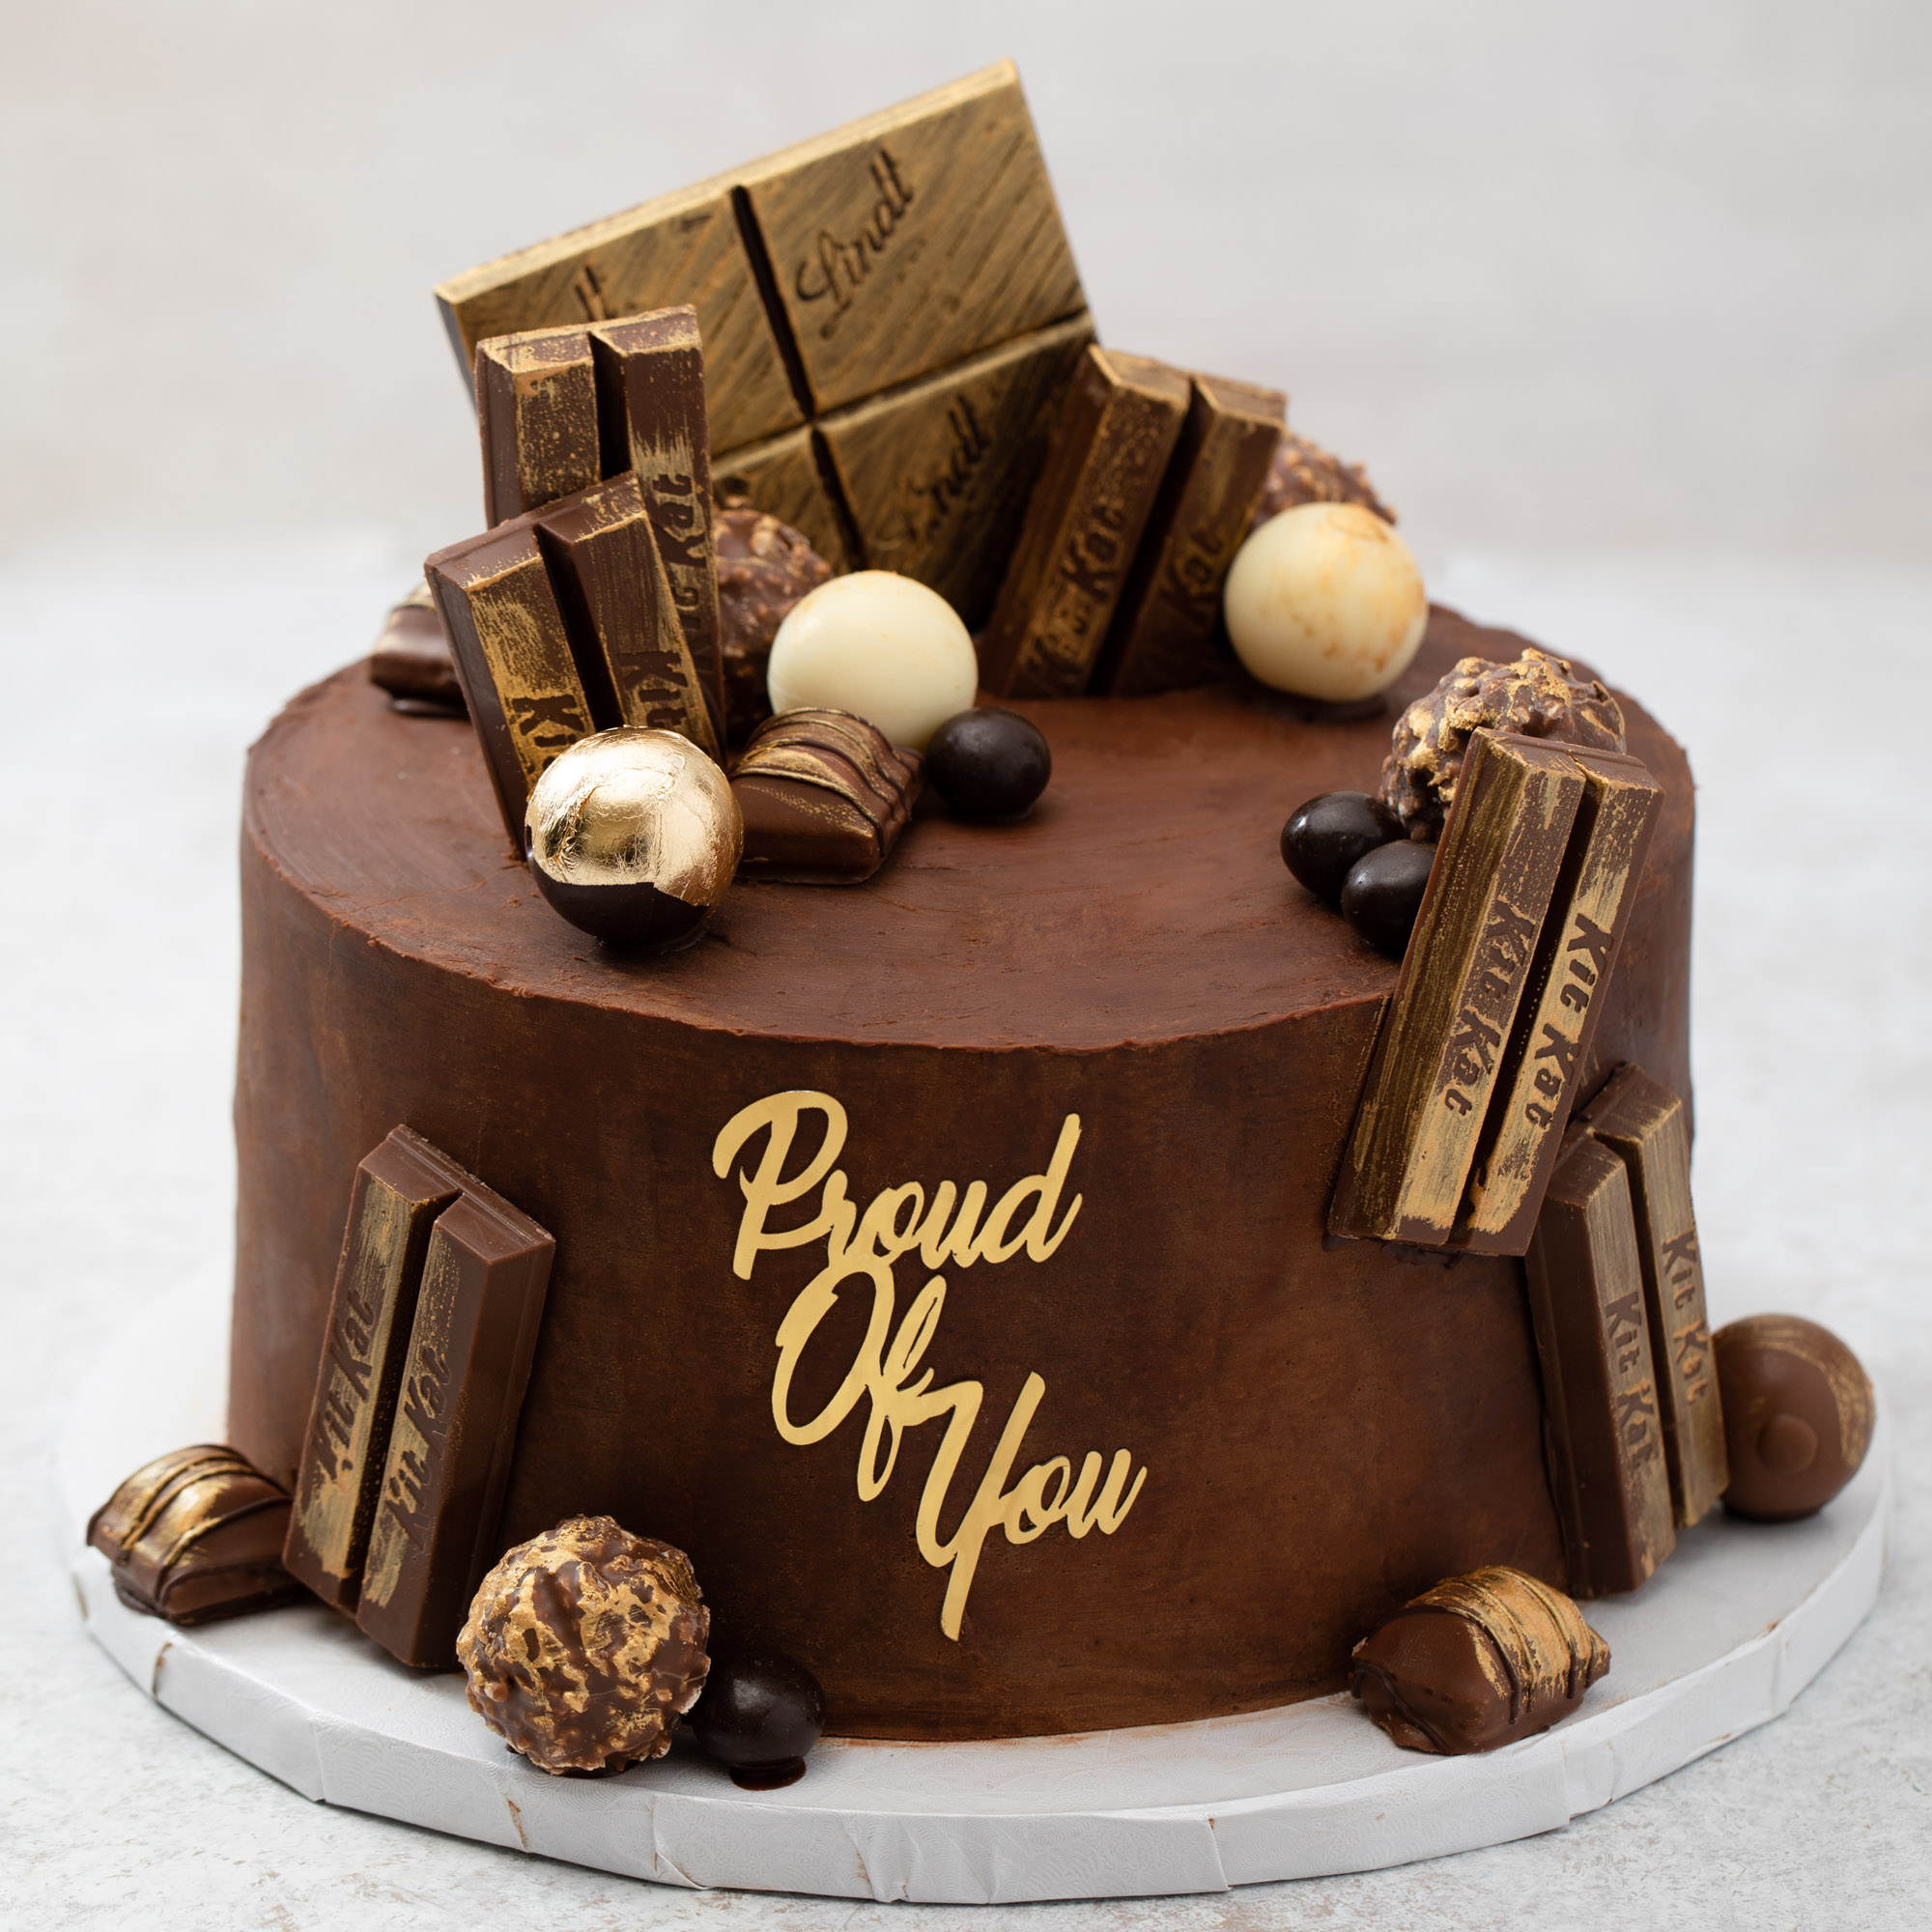 Kit Kat Chocolate 1Kg Special Cakes by Cake Square |1 Hour Delivery |Chocolate  Cakes Online - Cake Square Chennai | Cake Shop in Chennai